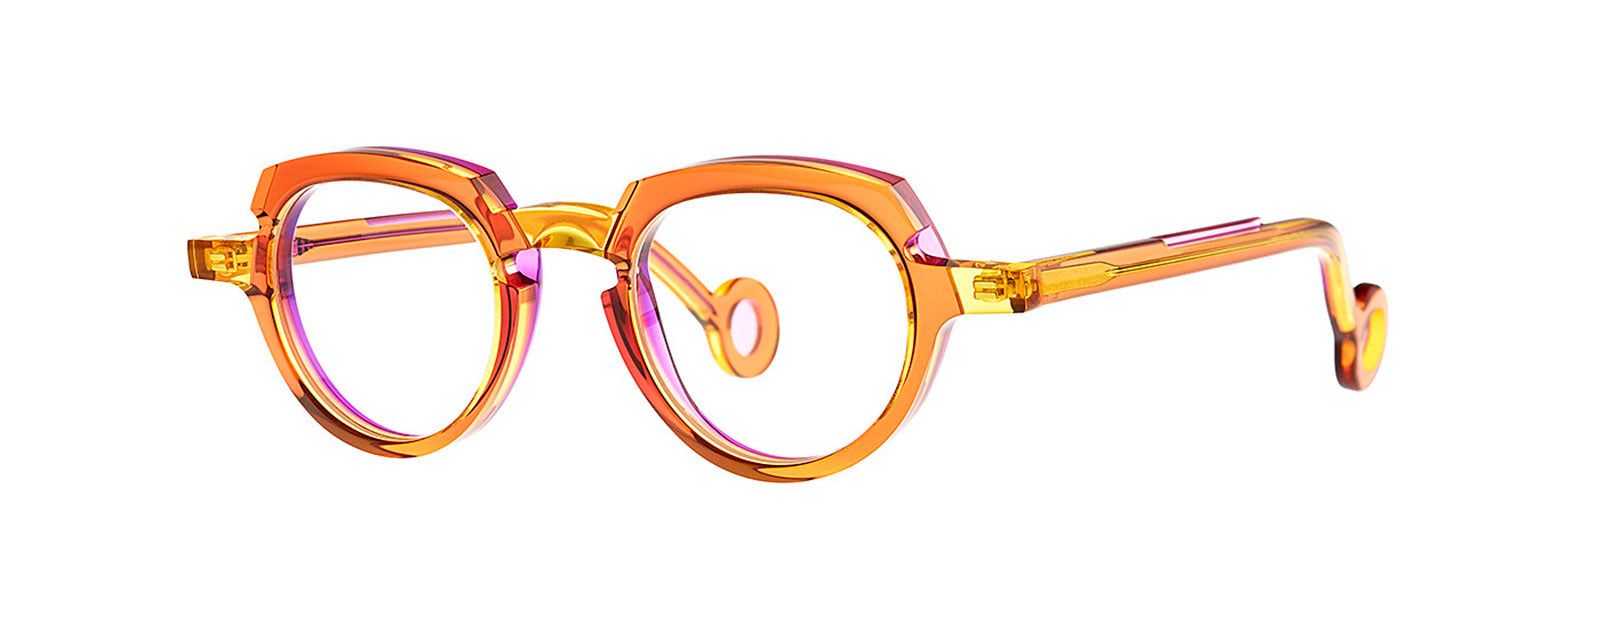 Andy - 10 Transparent yellow/Transparent purple by Theo Eyewear